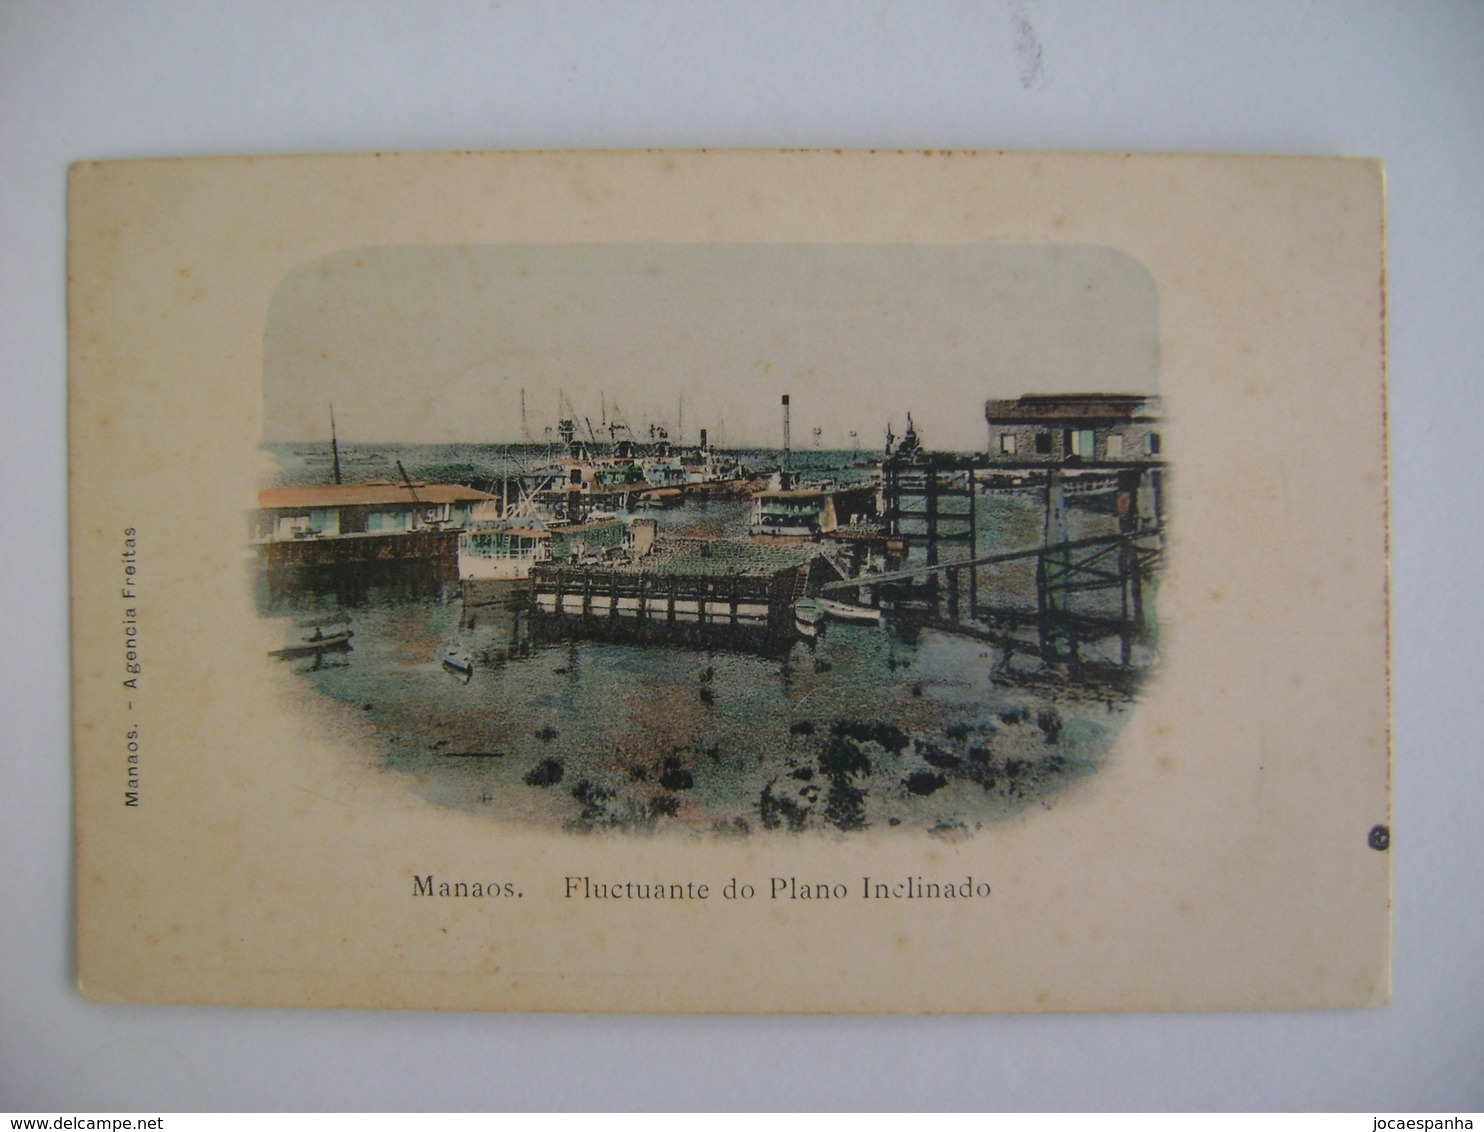 BRAZIL / BRASIL - POST CARD FOR MANAUS "FLUCTUANTE DO PLANO INCLINADO" 191? IN THE STATE - Manaus